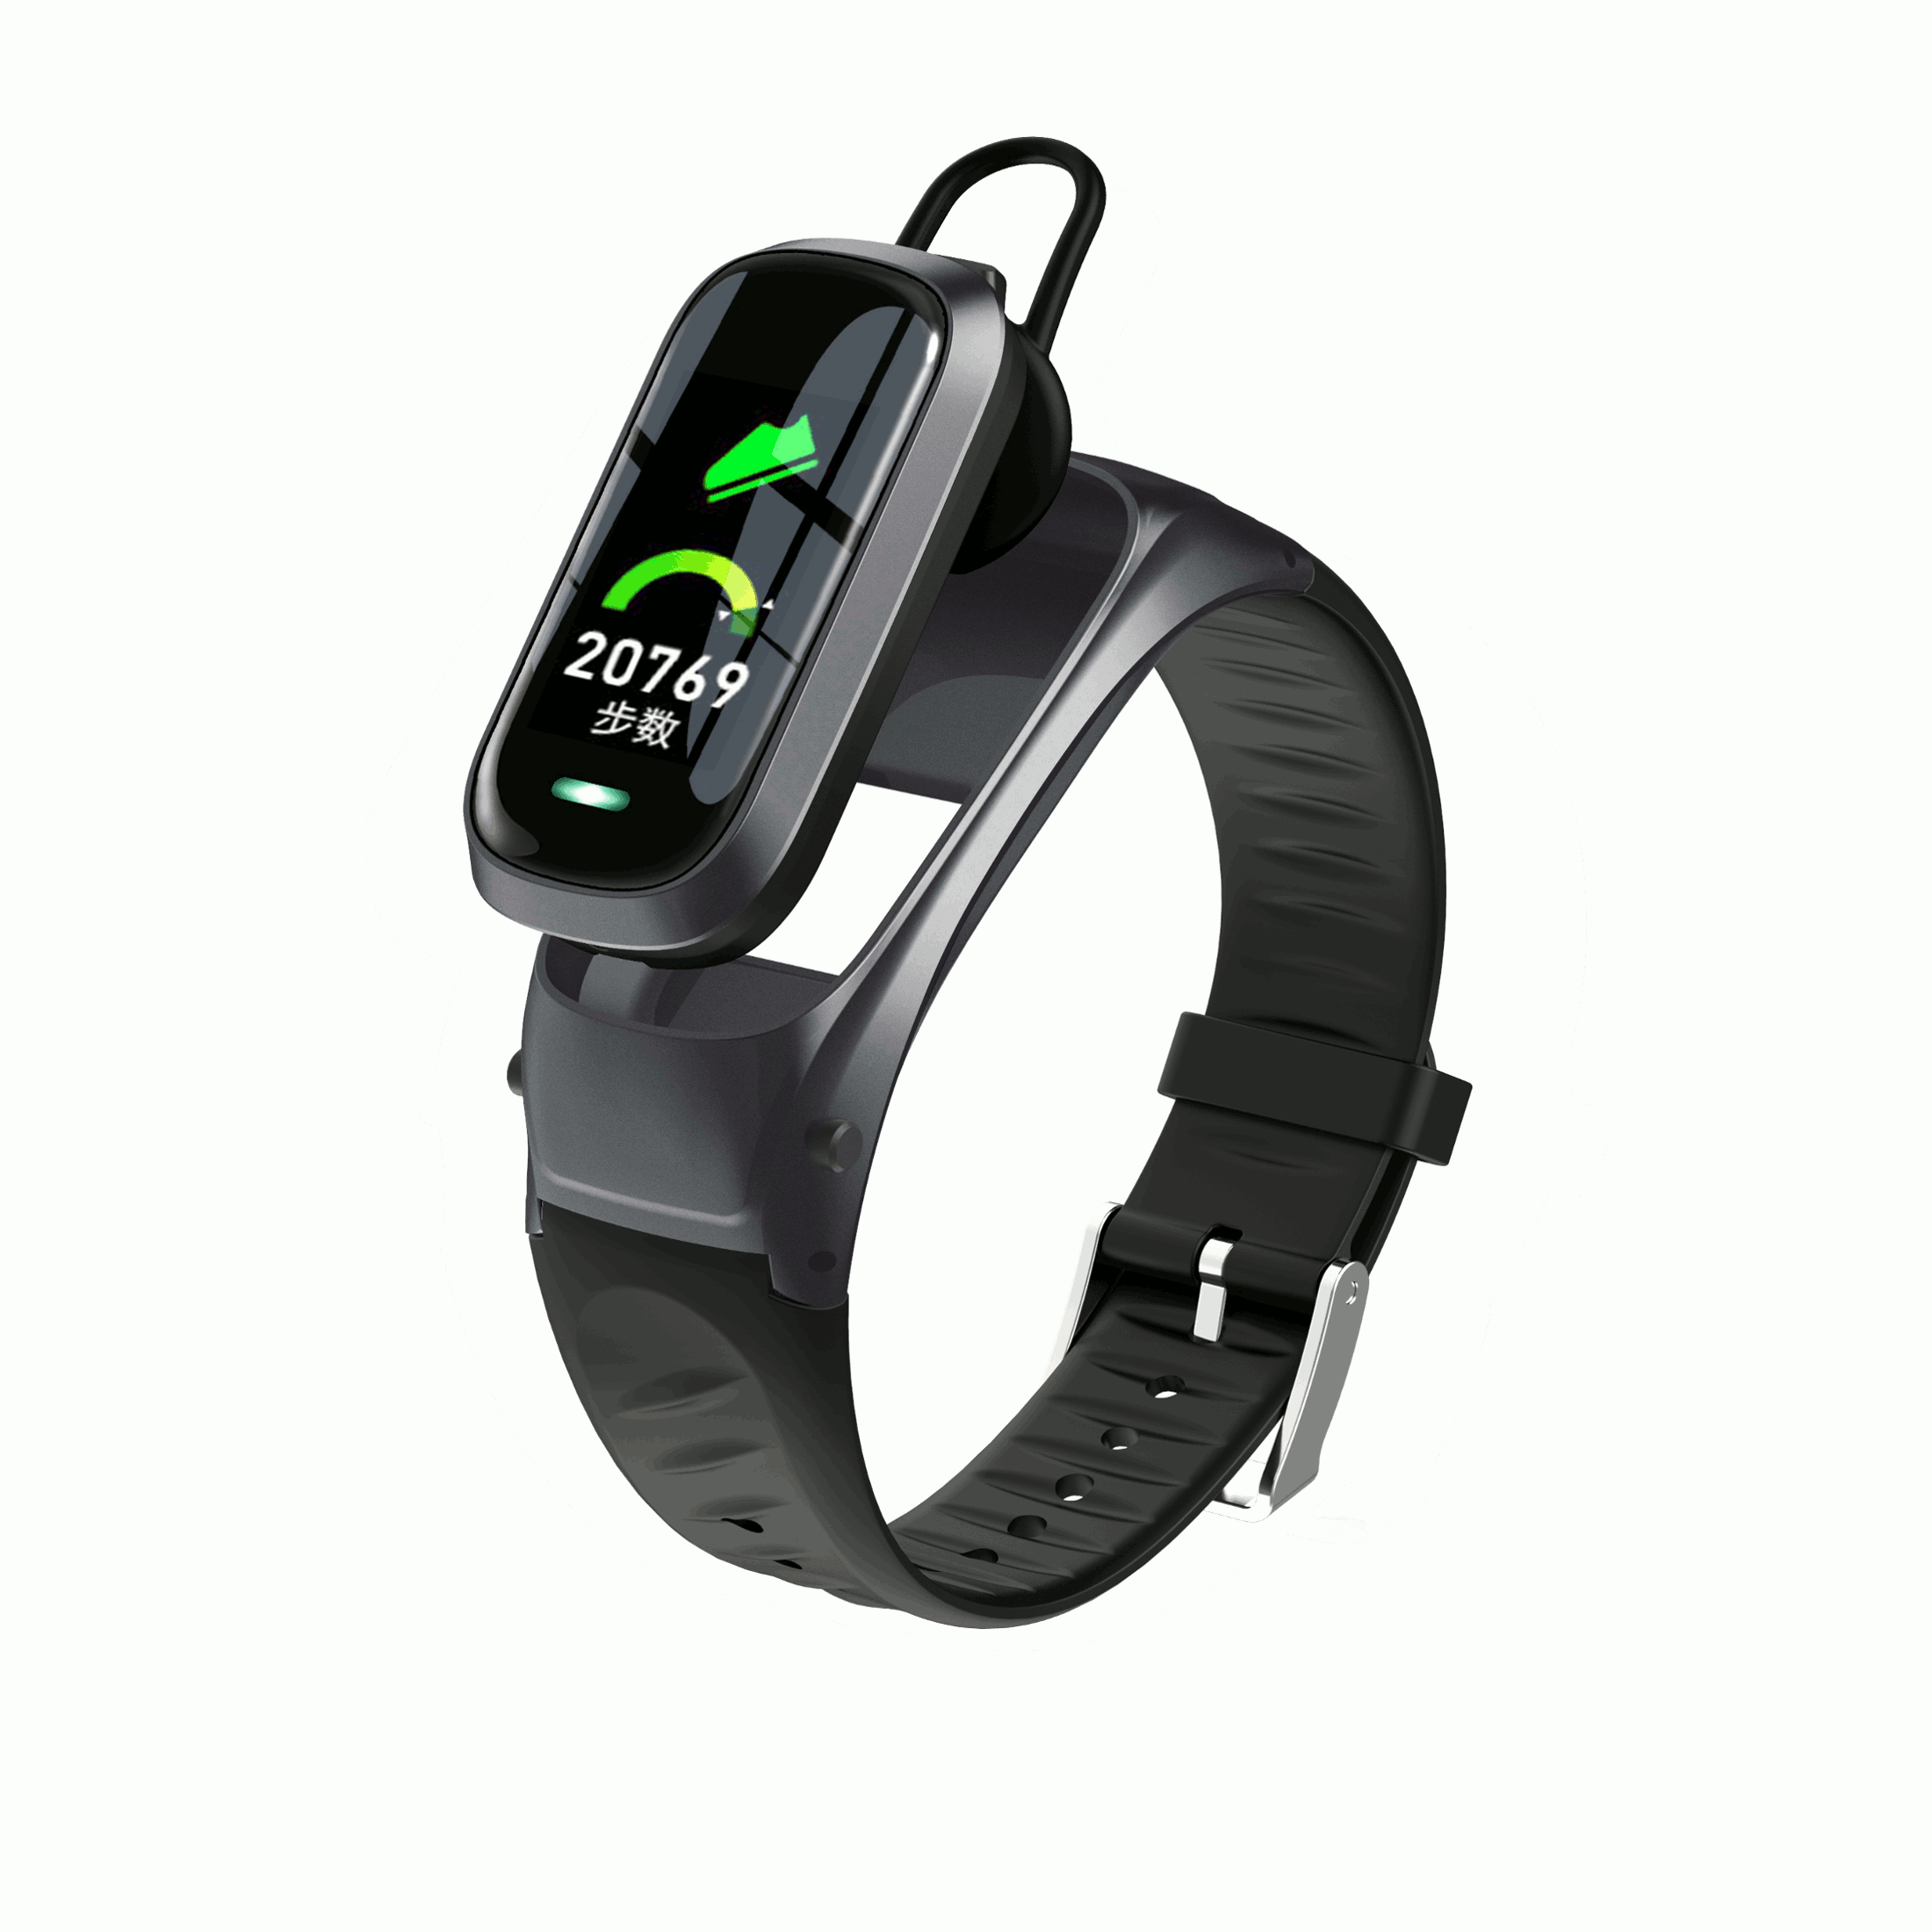 

Bakeey B9 BT5.0 Wristband bluetooth Call AI Voice Assistant Blood Oxygen Heart Rate Monitor HI-FI Quality Voice Smart Wa